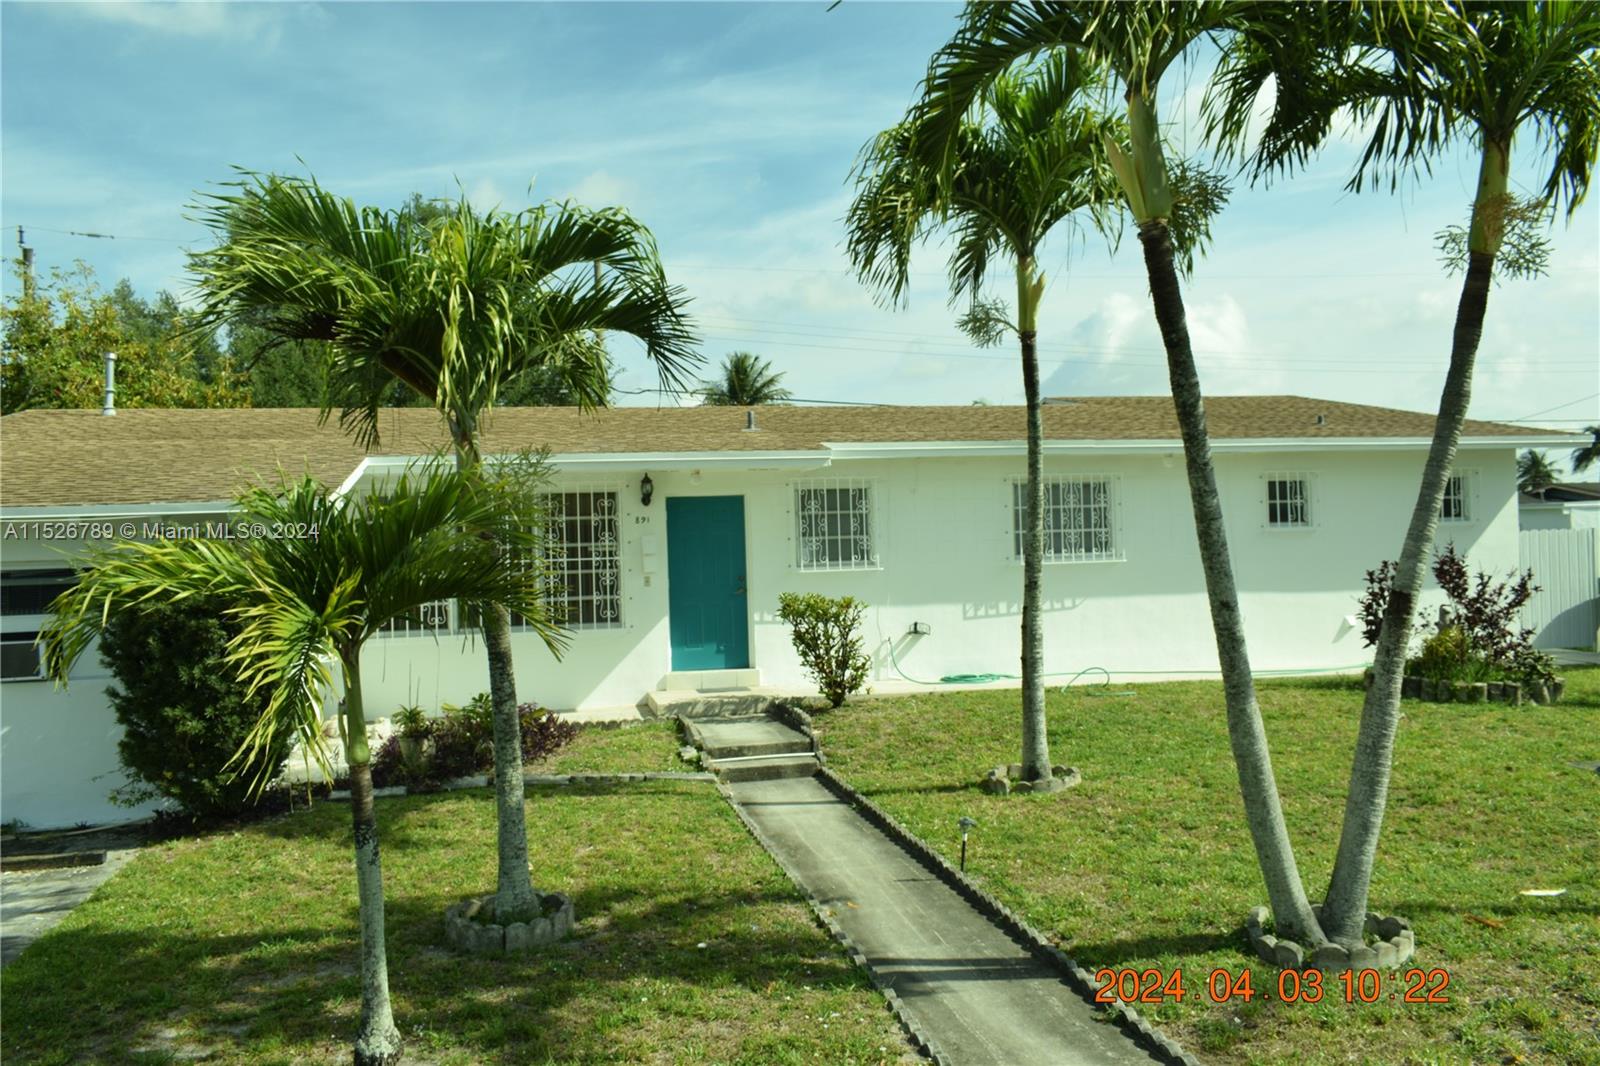 891 W 53rd St St, Hialeah, Miami-Dade County, Florida - 5 Bedrooms  
3 Bathrooms - 